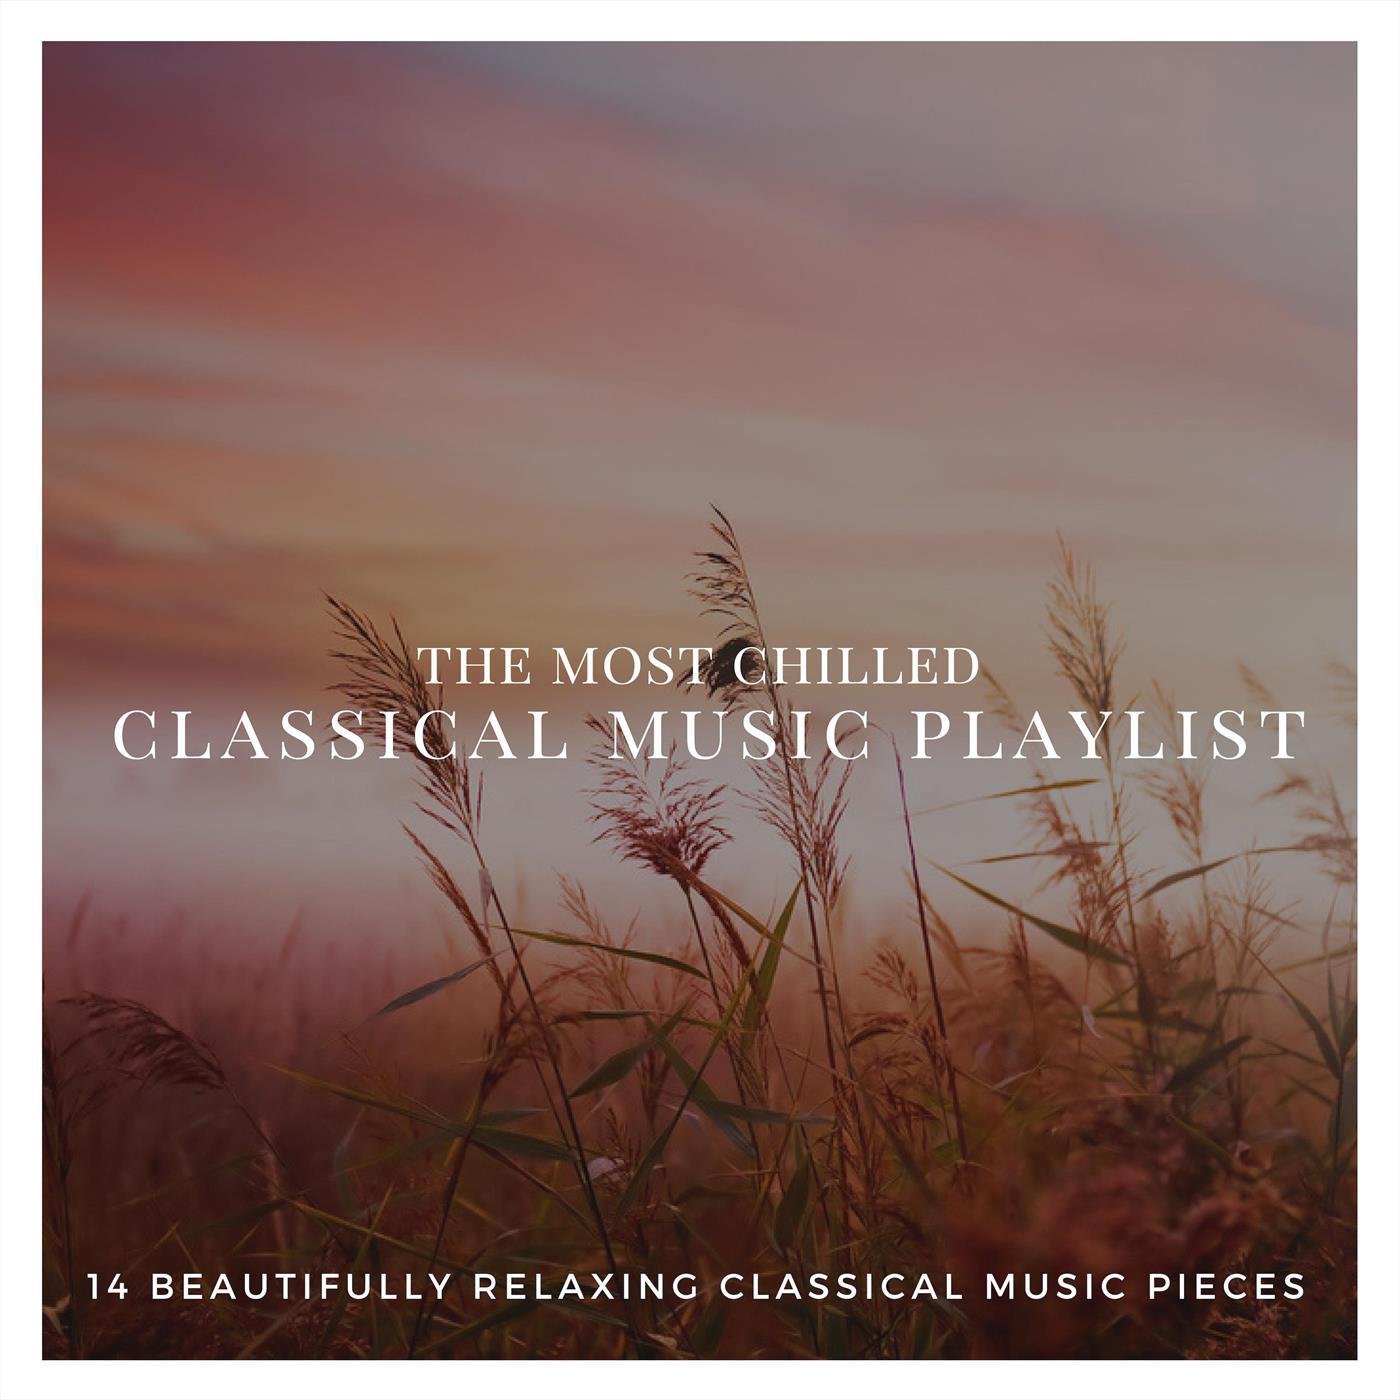 The Most Chilled Classical Music Playlist: 14 Beautifully Relaxing Classical Music Pieces